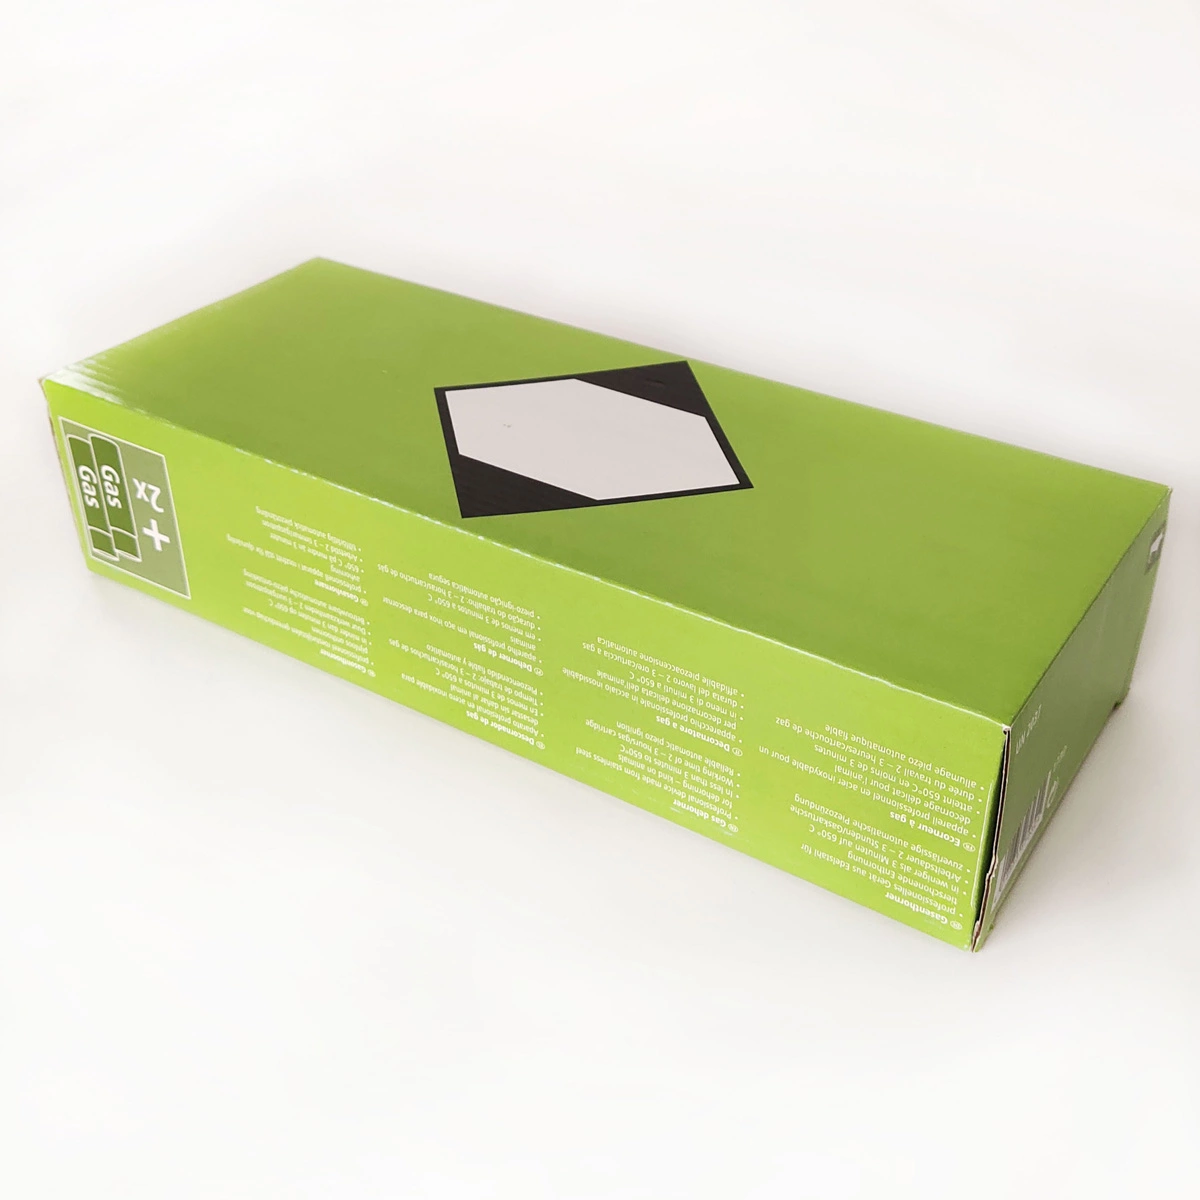 PB008 Package Product Package Folding Box